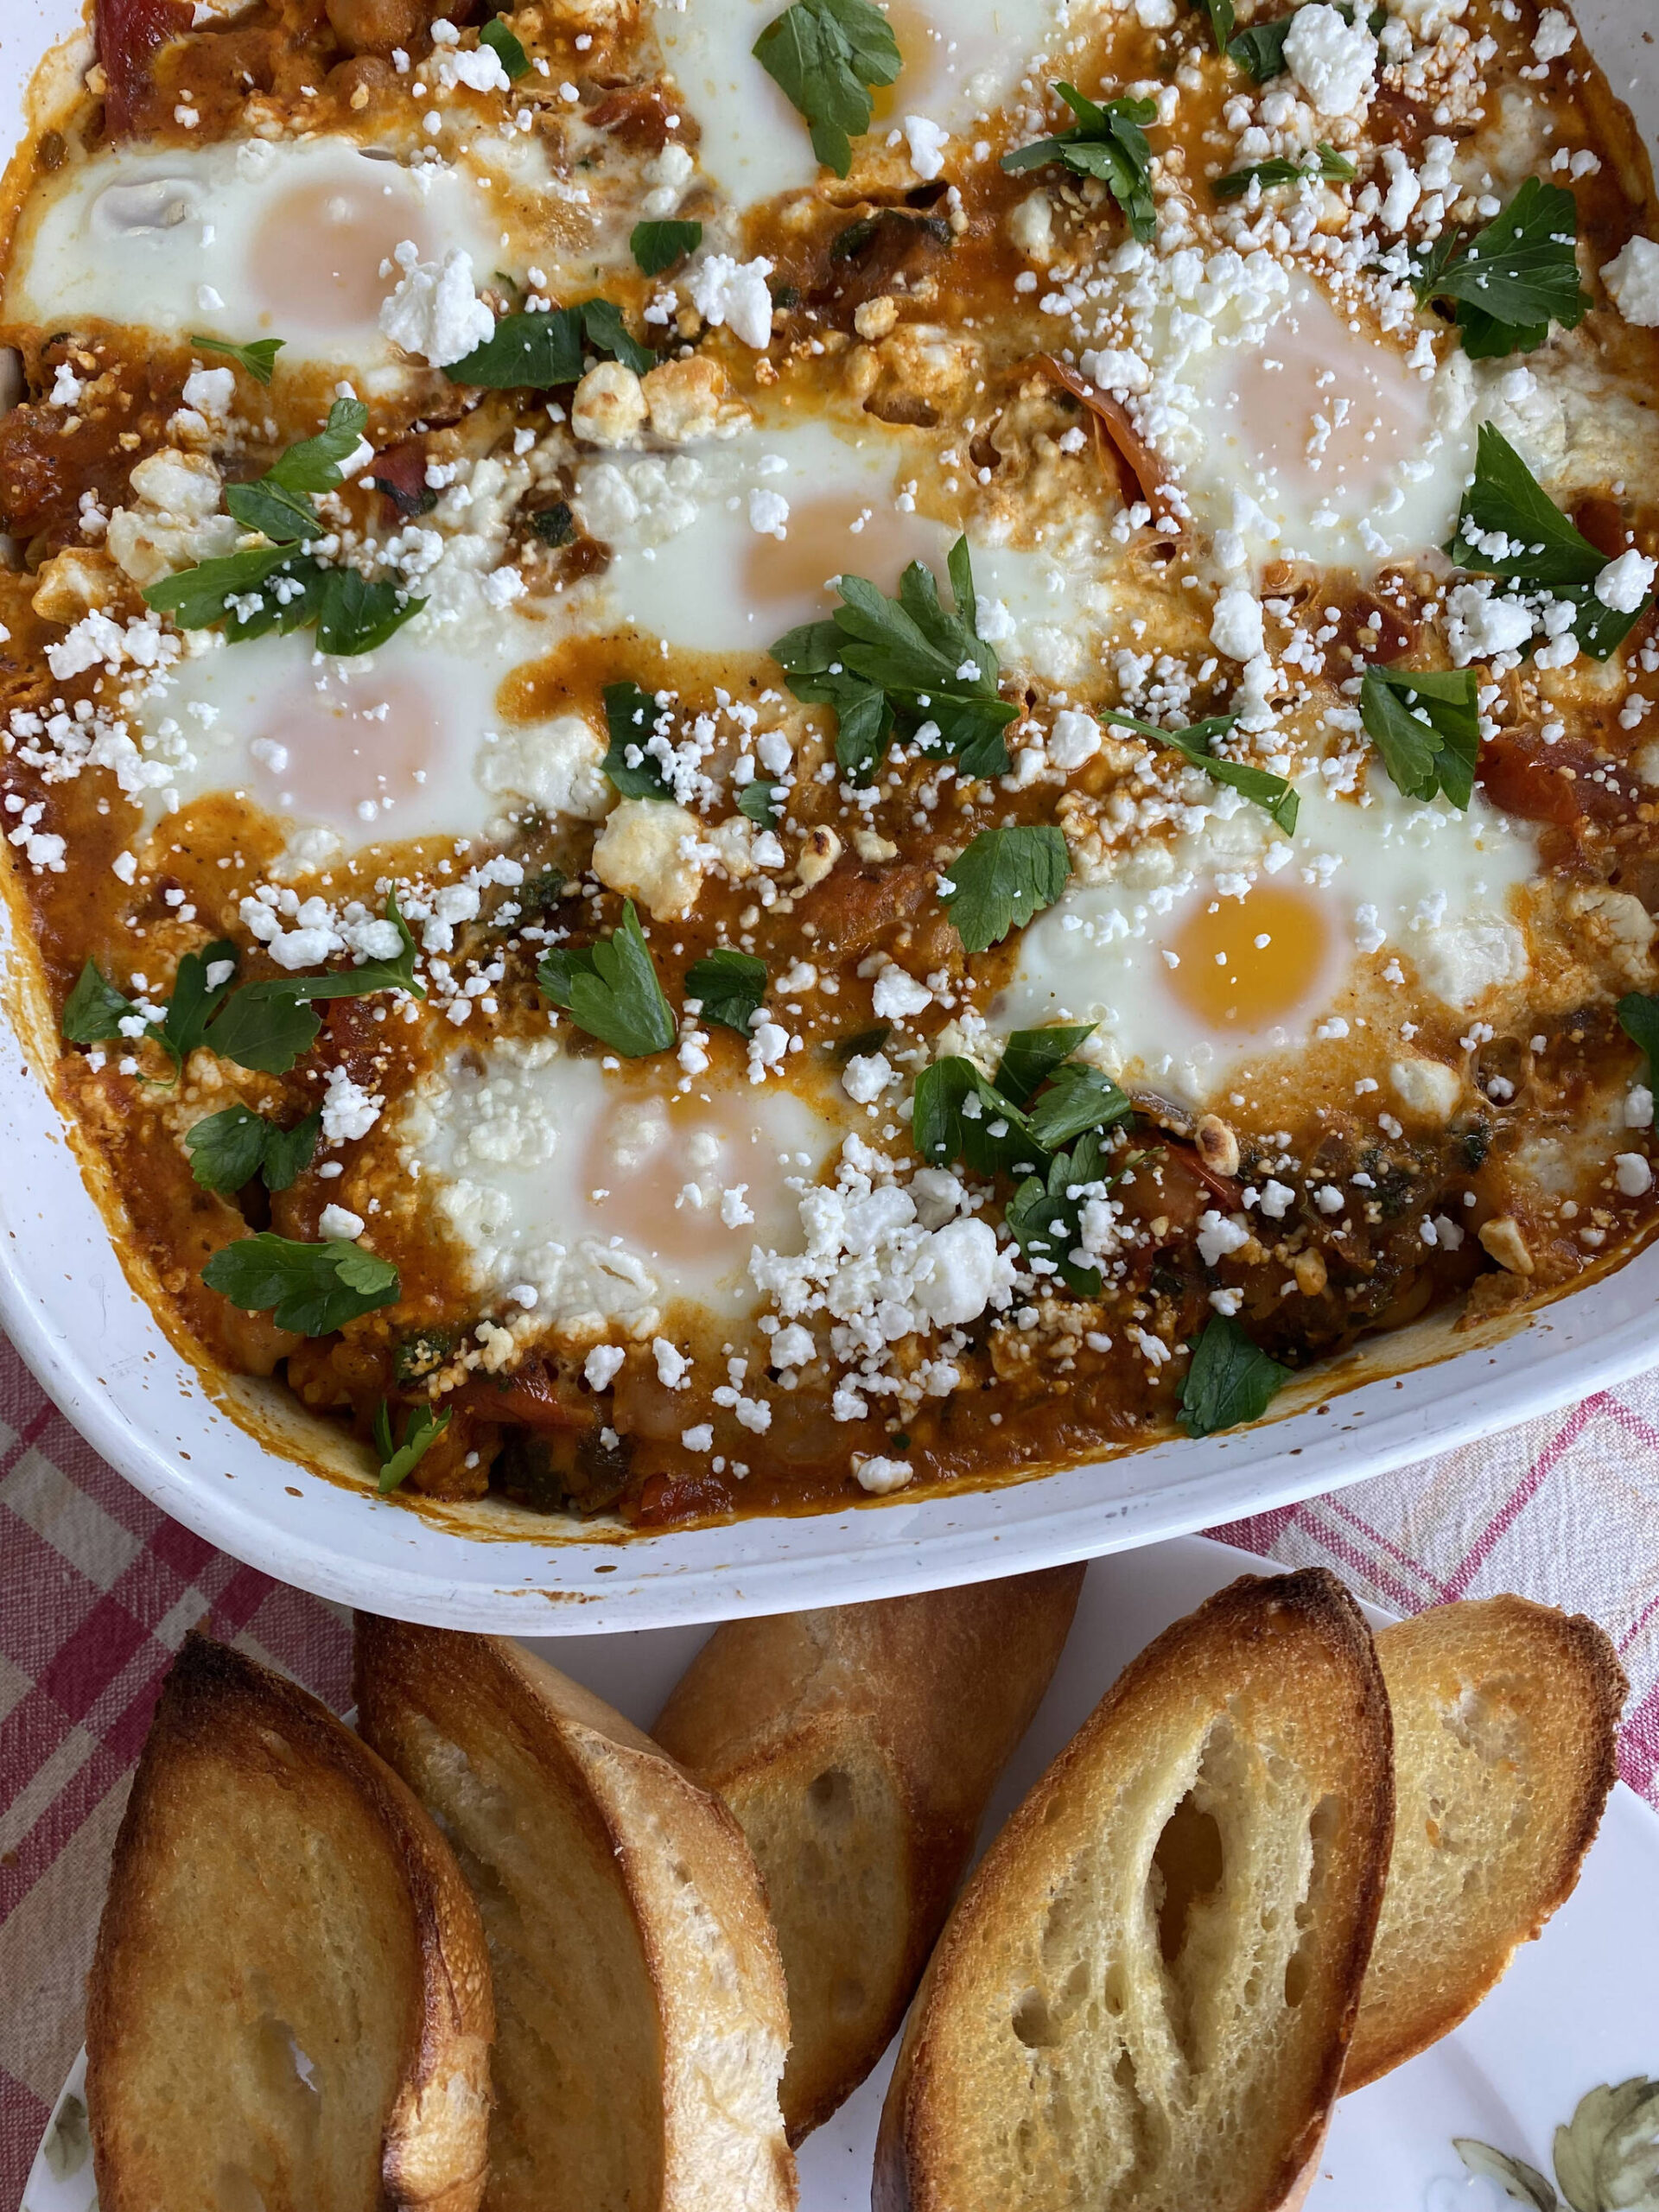 North African Shakshuka is a rich and vibrant dish and great way to use up eggs. (Photo by Tressa Dale/Peninsula Clarion)